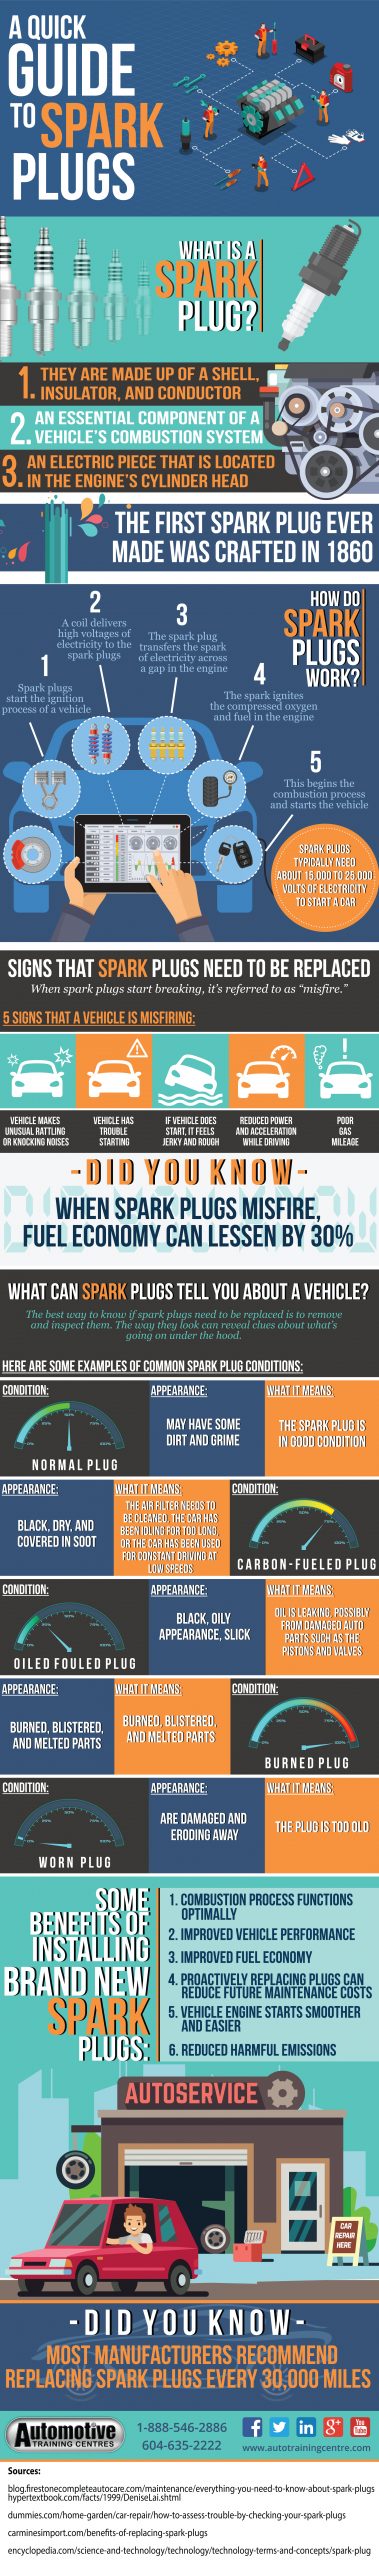 [Infographic] A Quick Guide to Spark Plugs